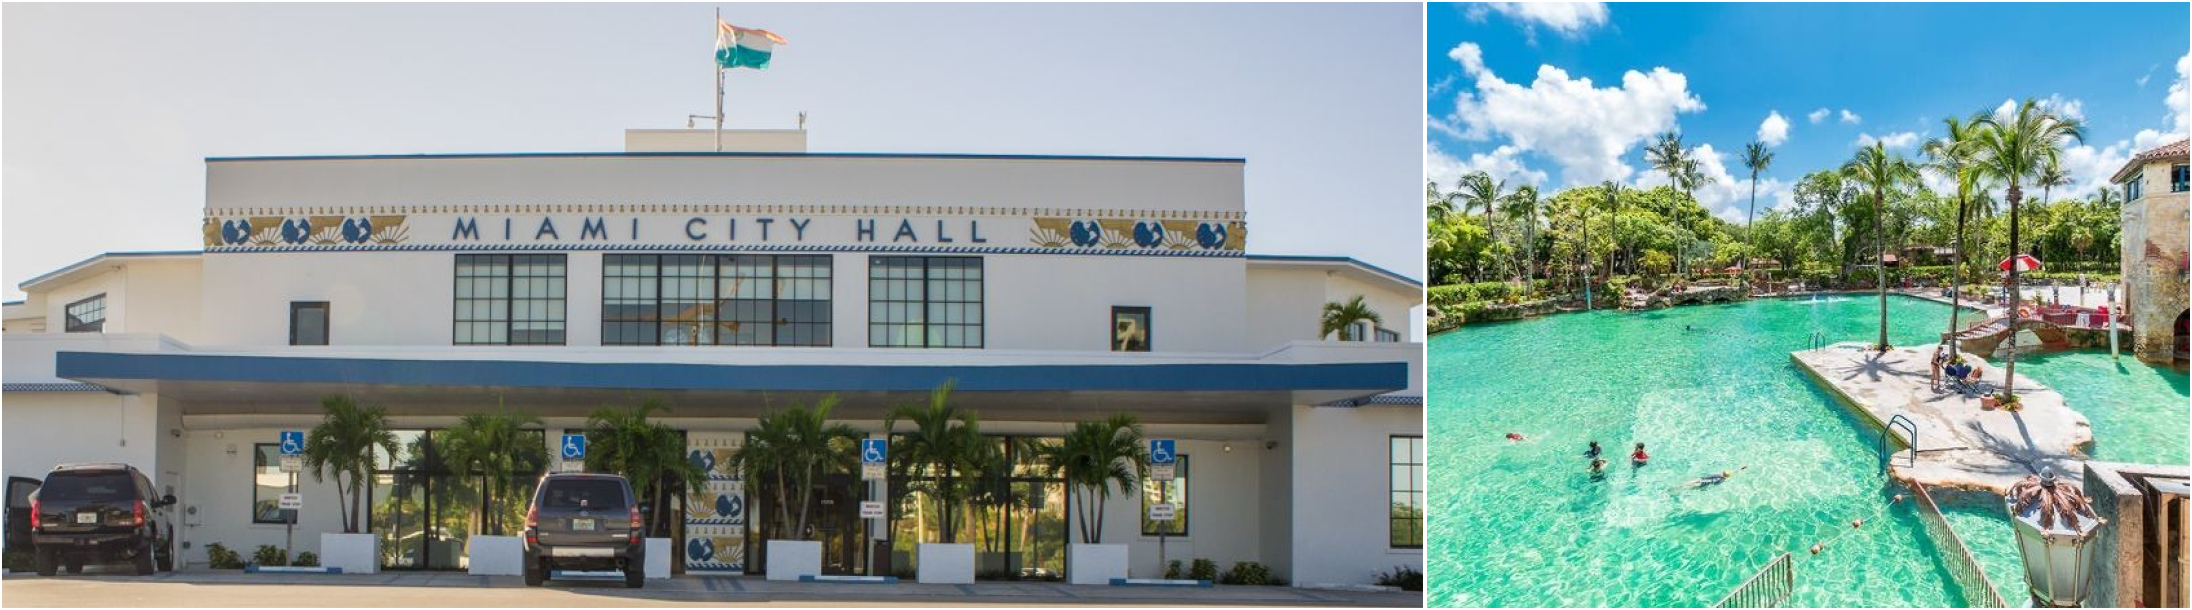 Miami's city hall is a former seaplane terminal for Pan American, and it sits on the Coconut Grove Marina.